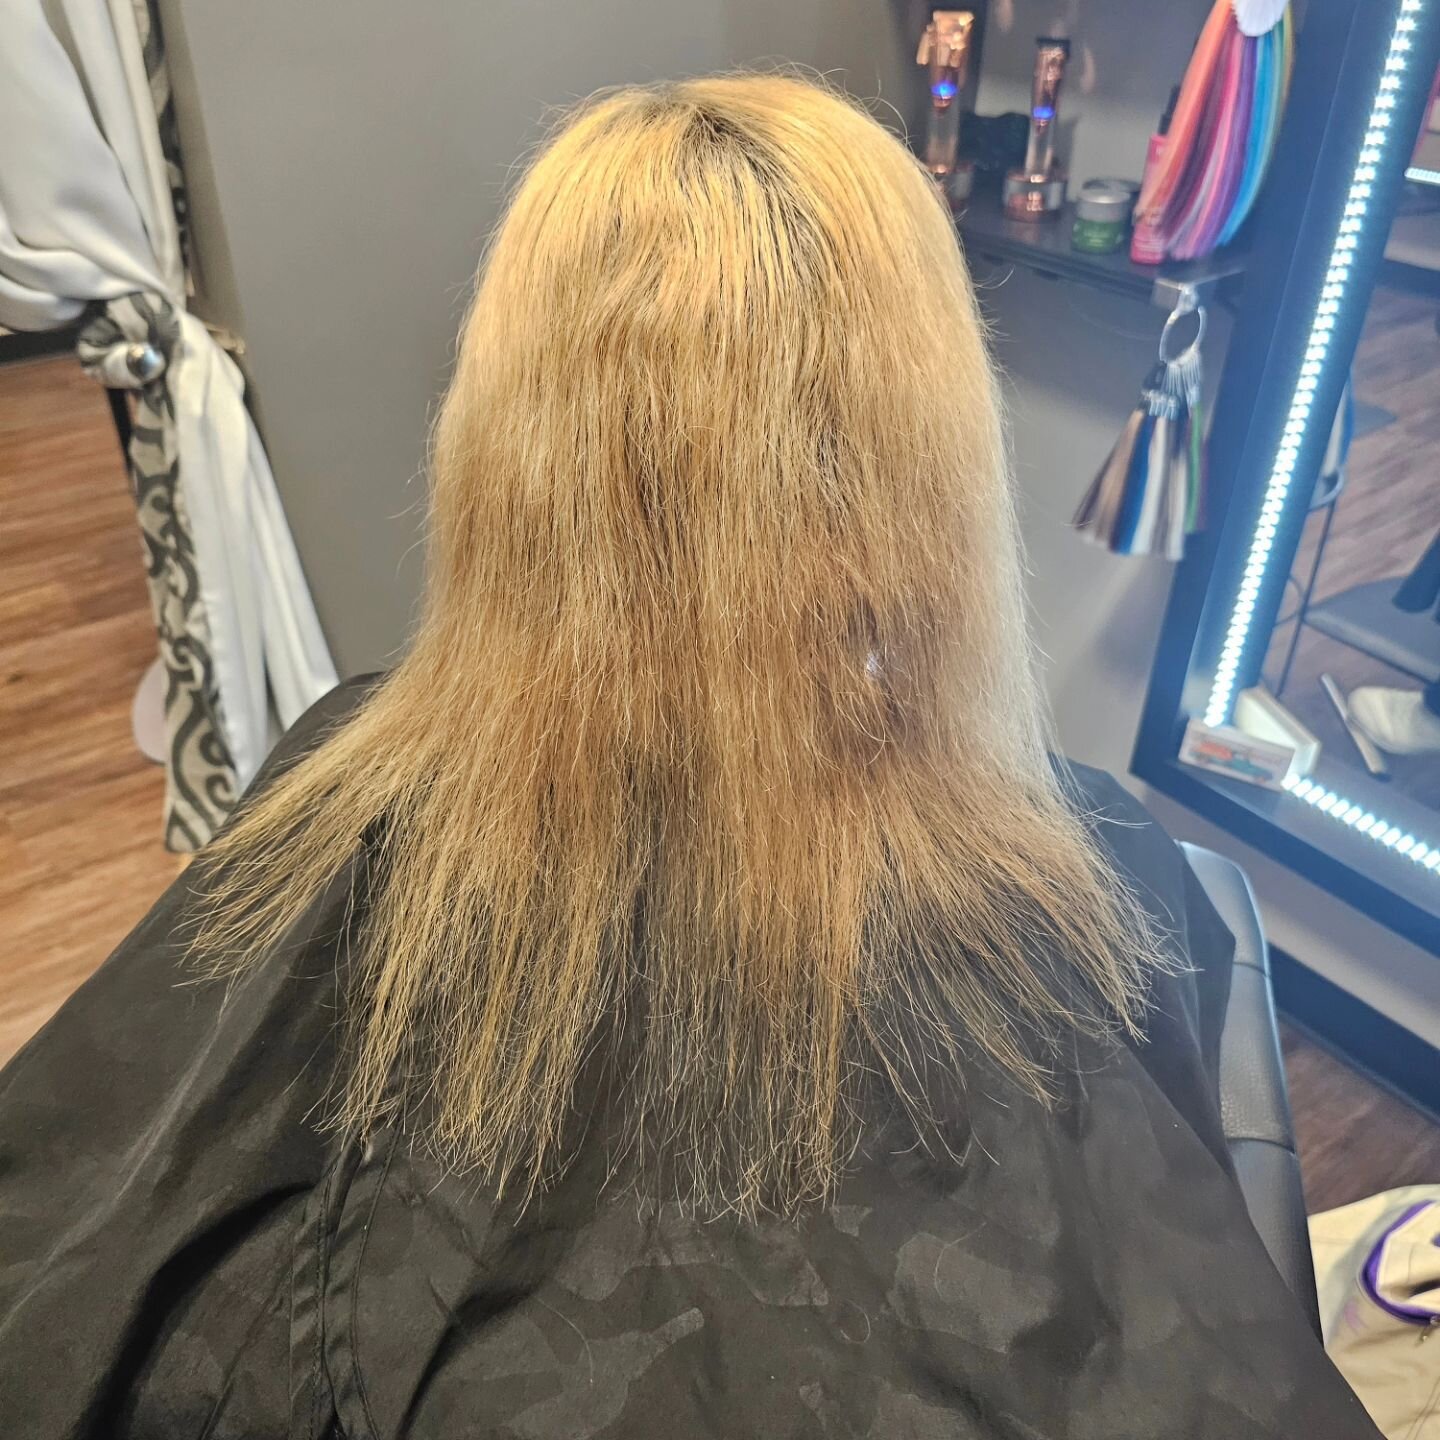 Swipe for the after! Had the pleasure of spending the day with my client Colleen to give her a complete overhaul🚨 this was my first time doing her hair, and we did it all! I removed her old hybrid weft extensions, did a color correction, keratin tre